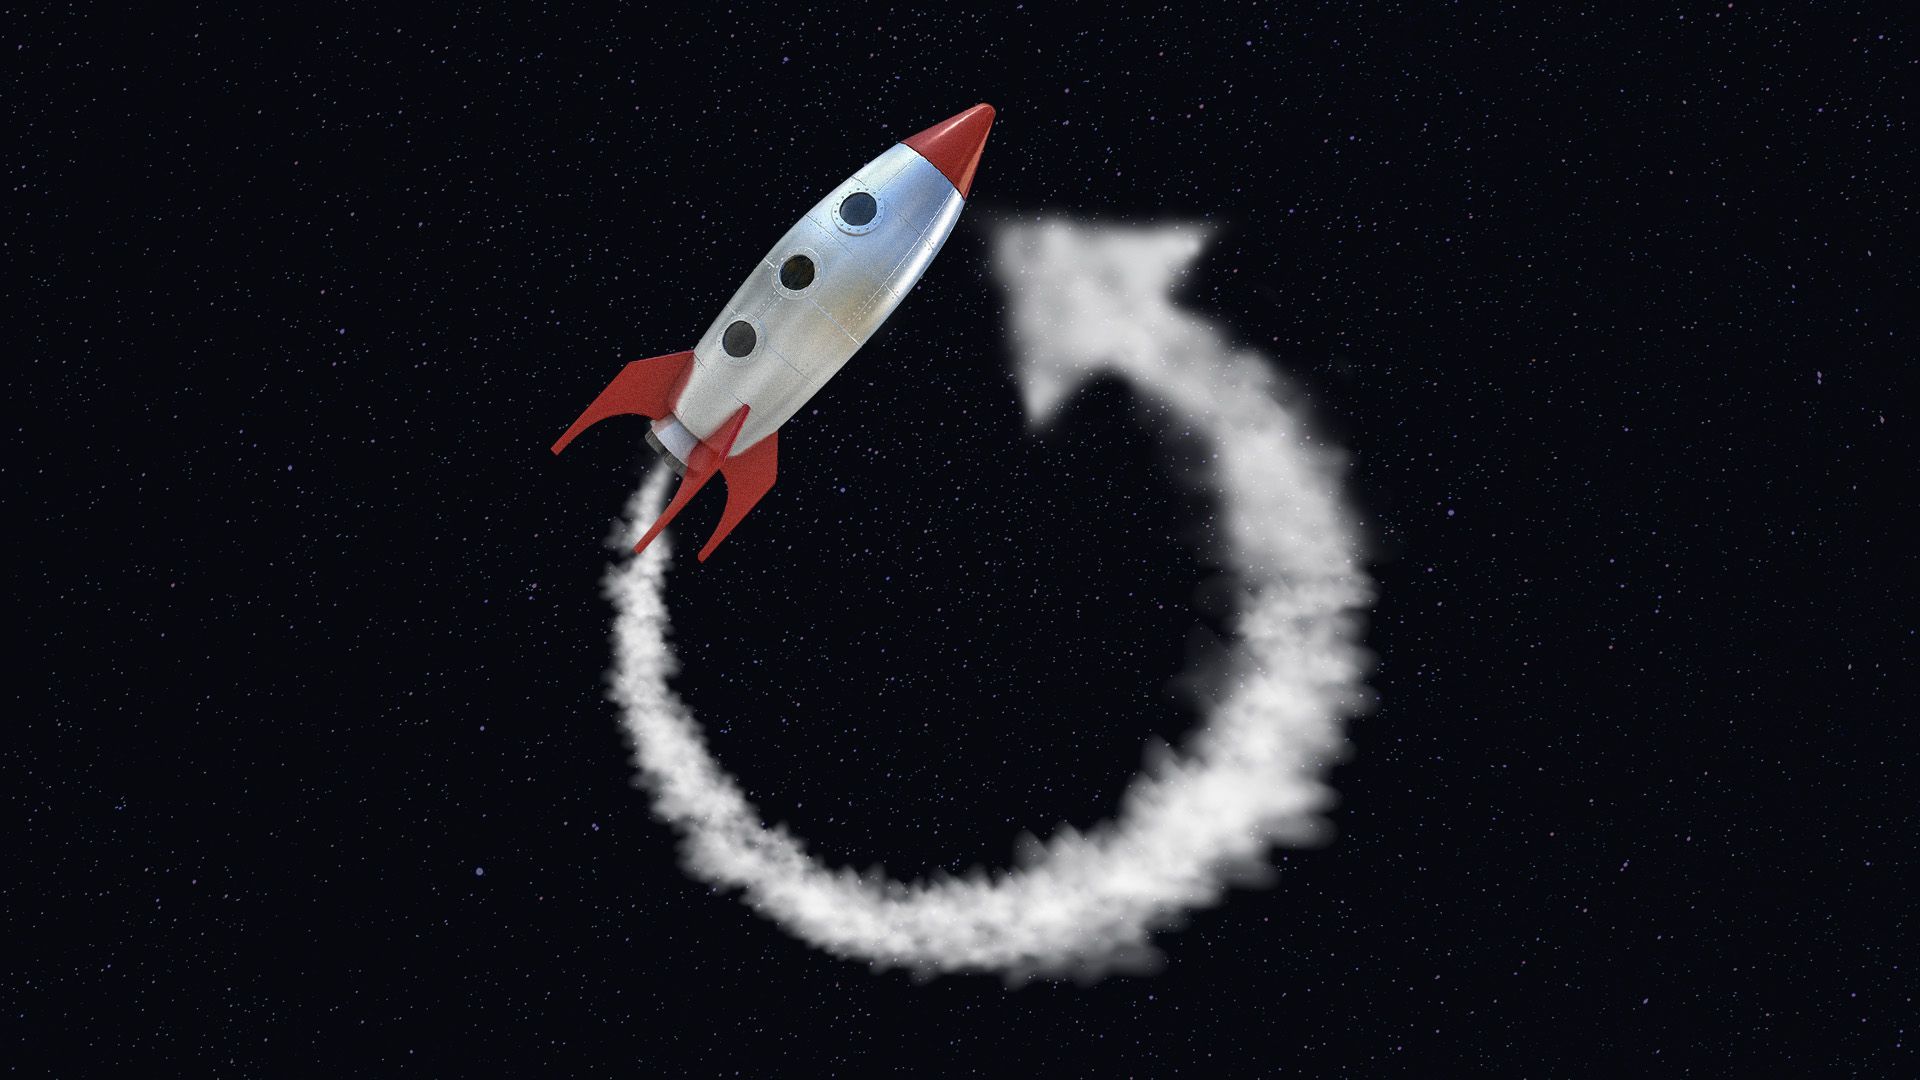 Illustration of a rocket with wake behind it forming a circular arrow repeat symbol